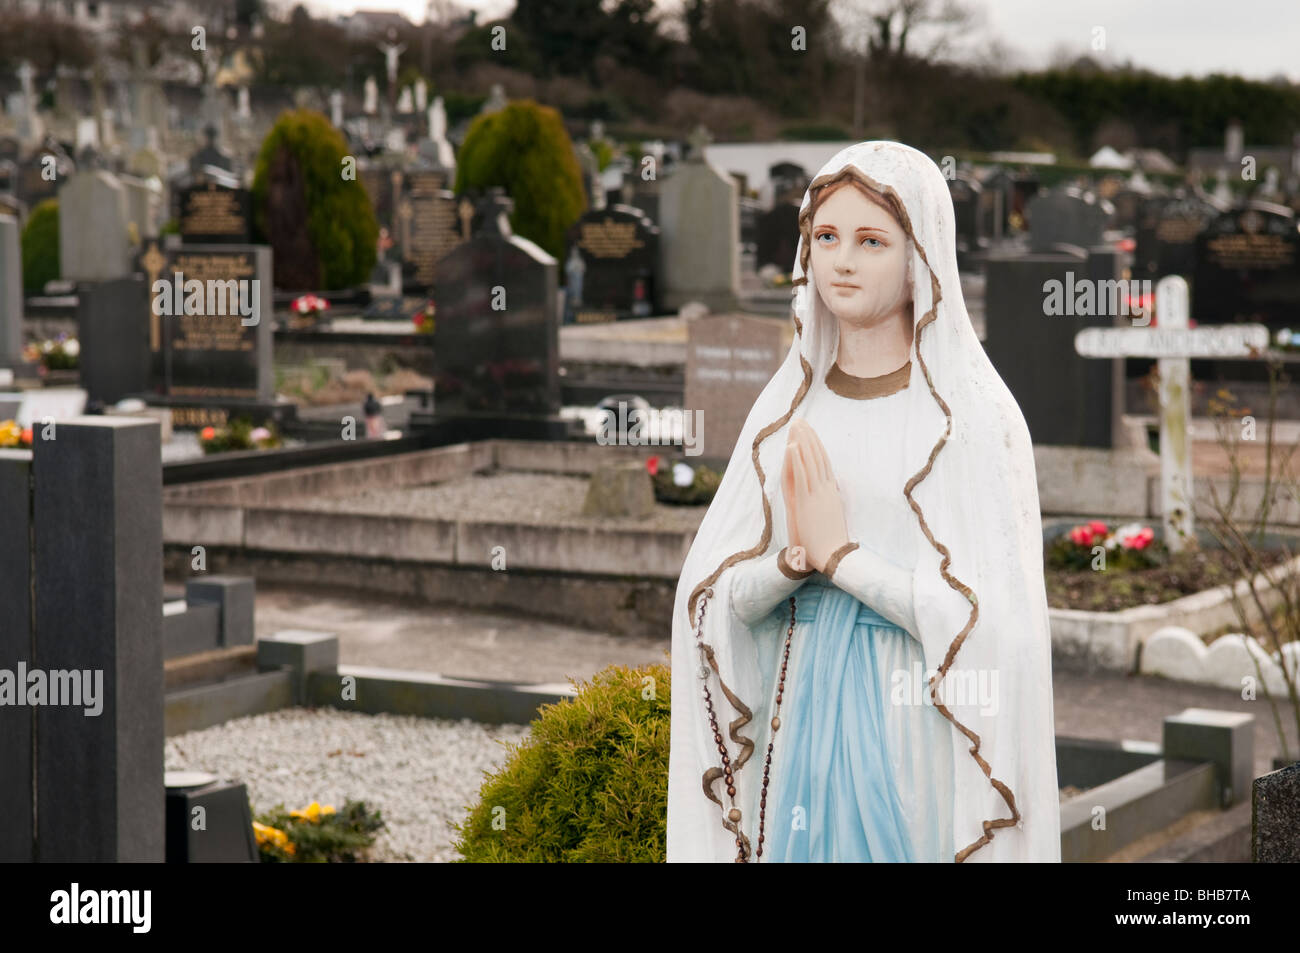 Statue of the Virgin Mary in a Catholic graveyard. Stock Photo